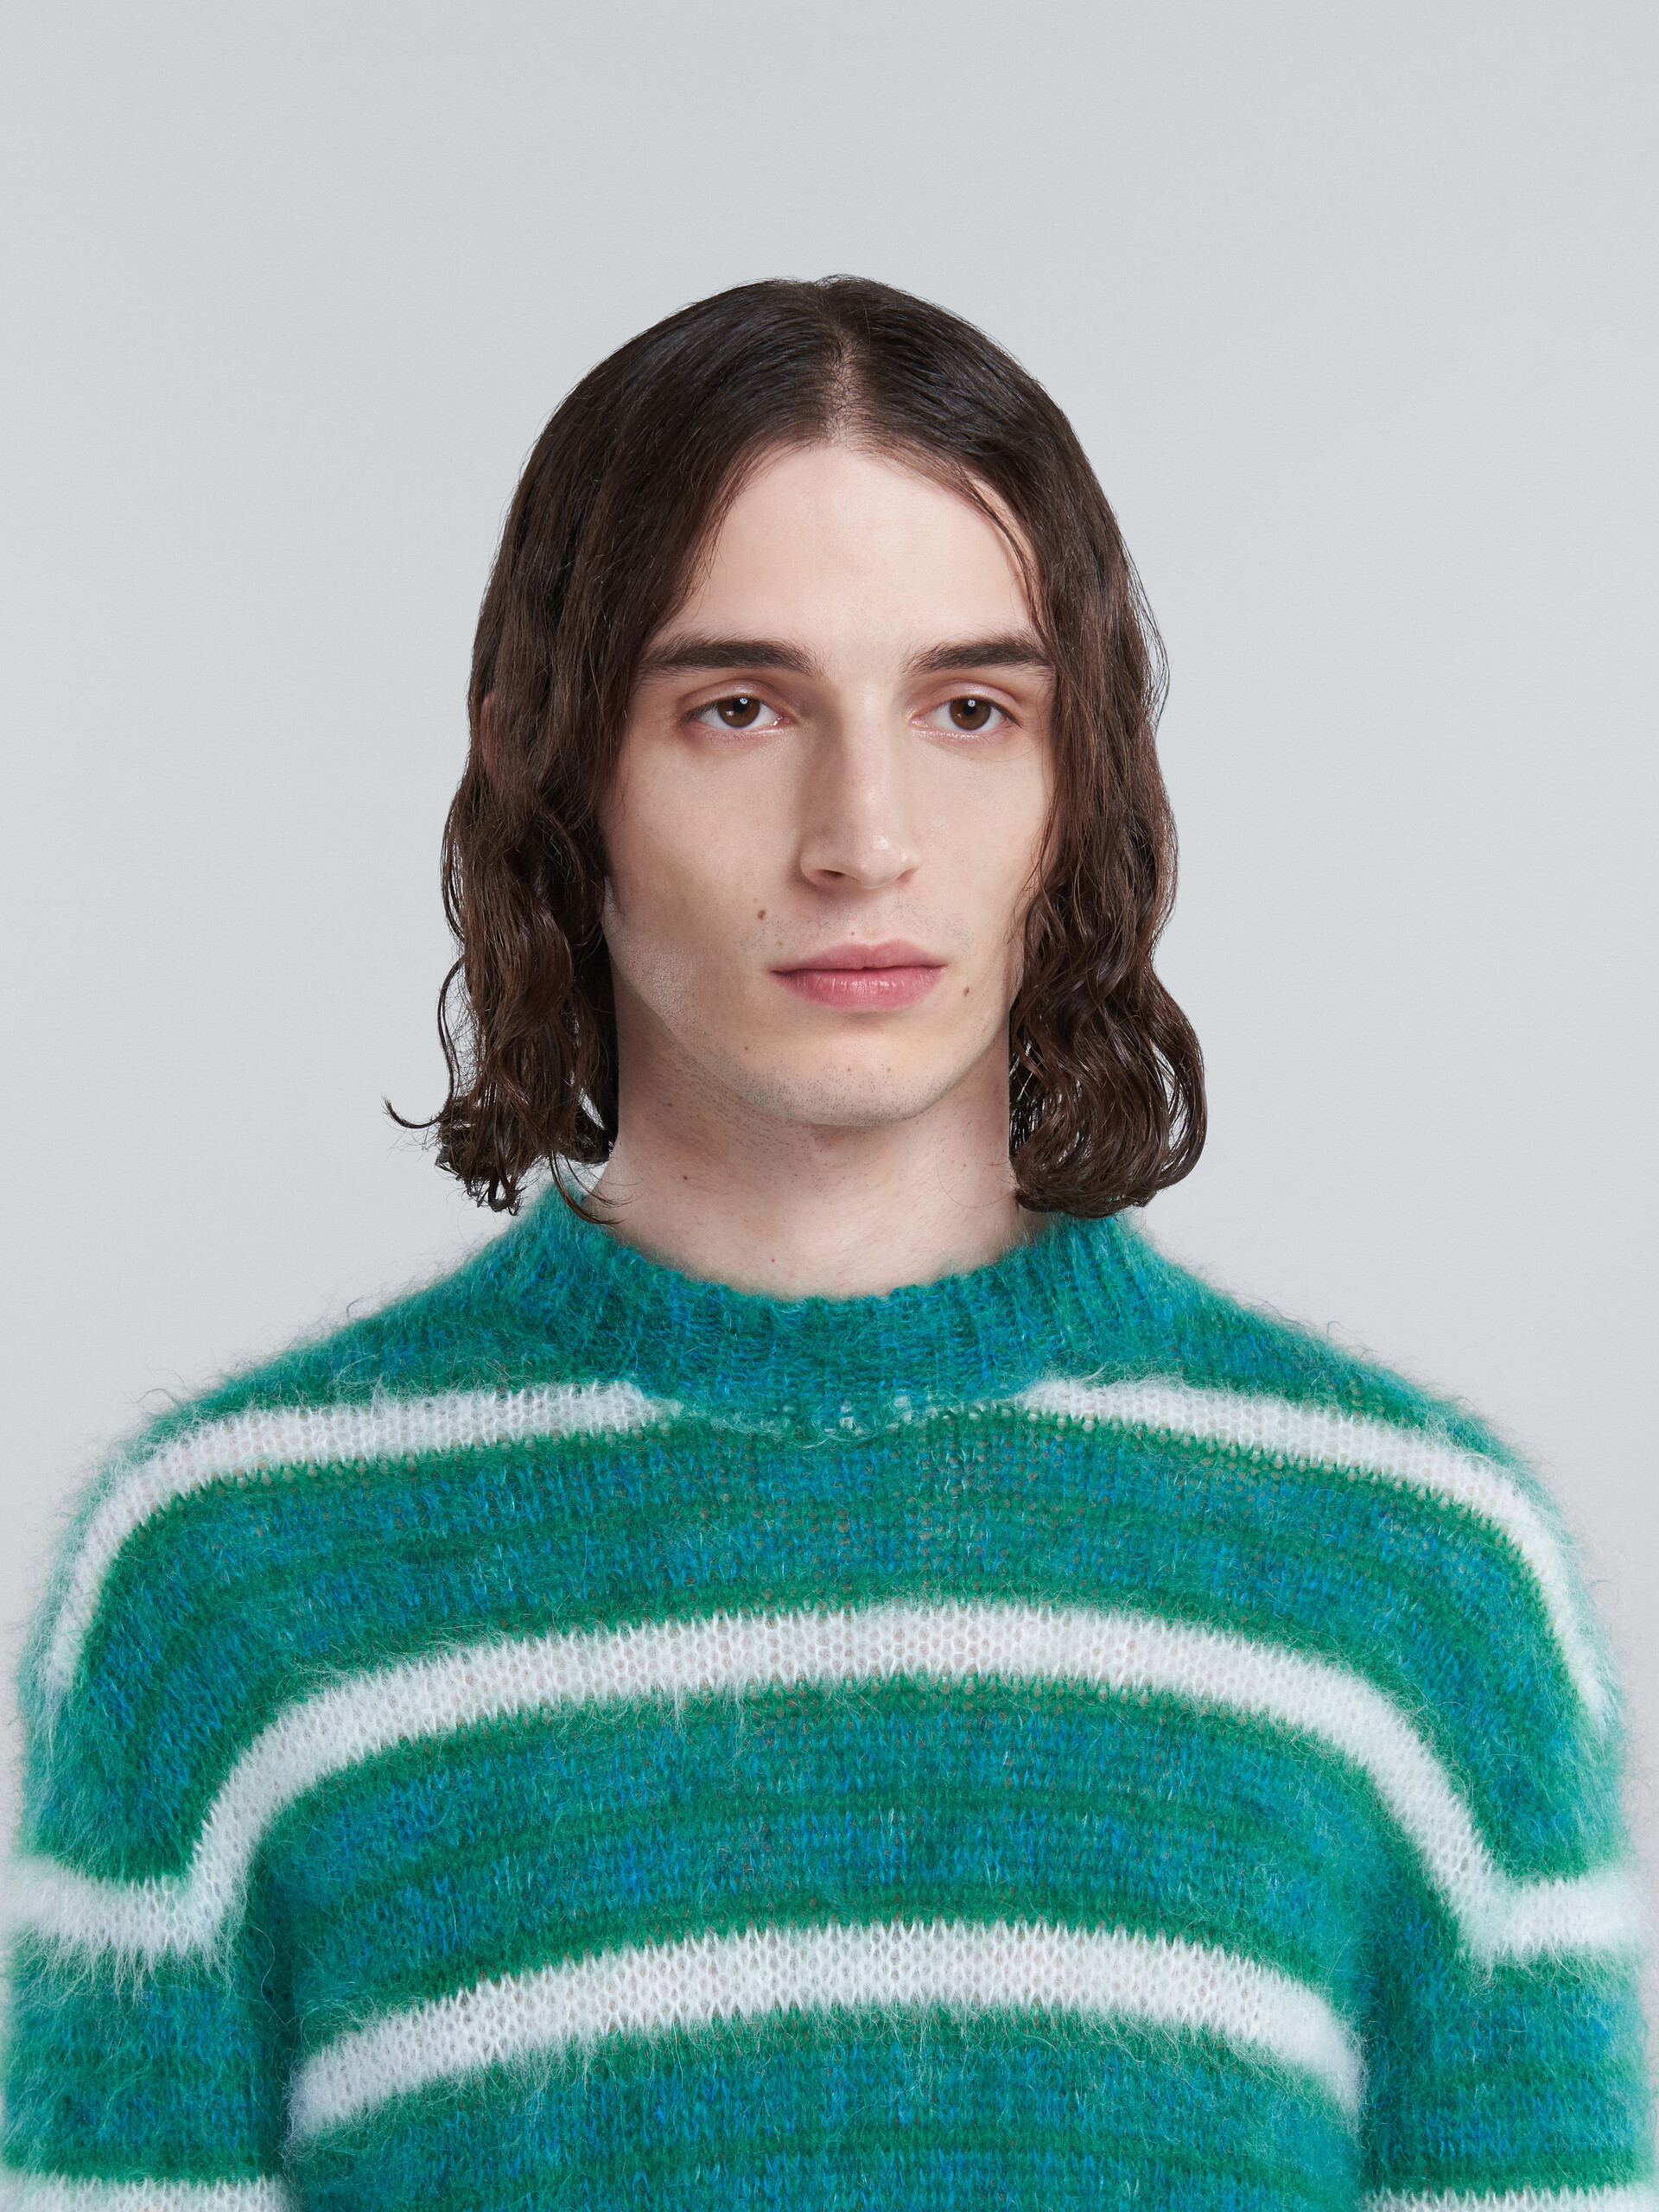 Turquoise striped mohair sweater - Pullovers - Image 4